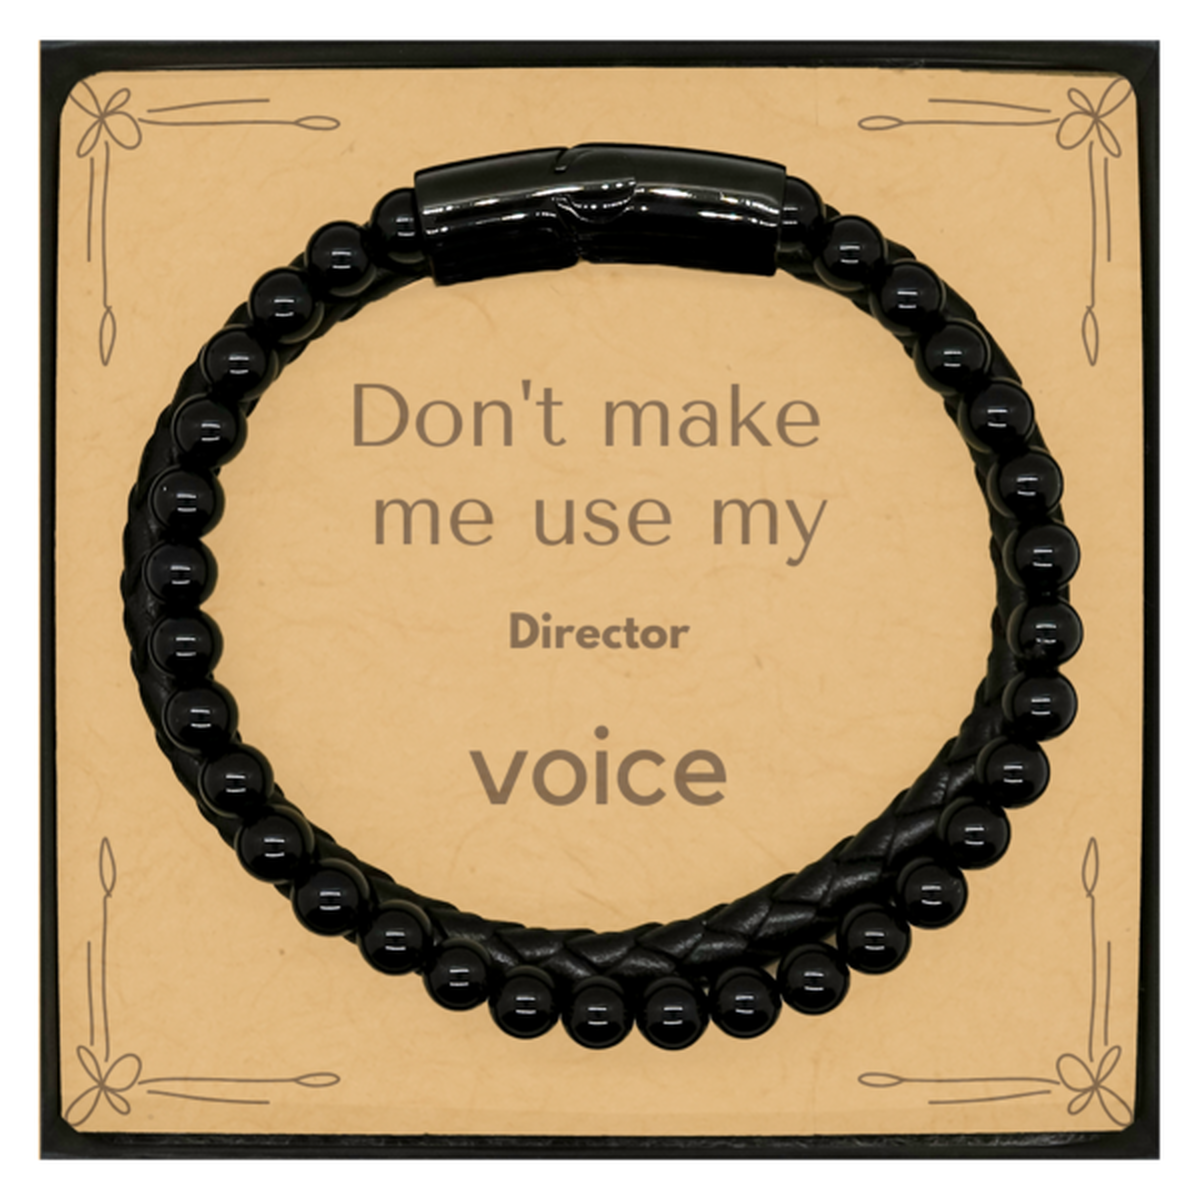 Don't make me use my Director voice, Sarcasm Director Card Gifts, Christmas Director Stone Leather Bracelets Birthday Unique Gifts For Director Coworkers, Men, Women, Colleague, Friends